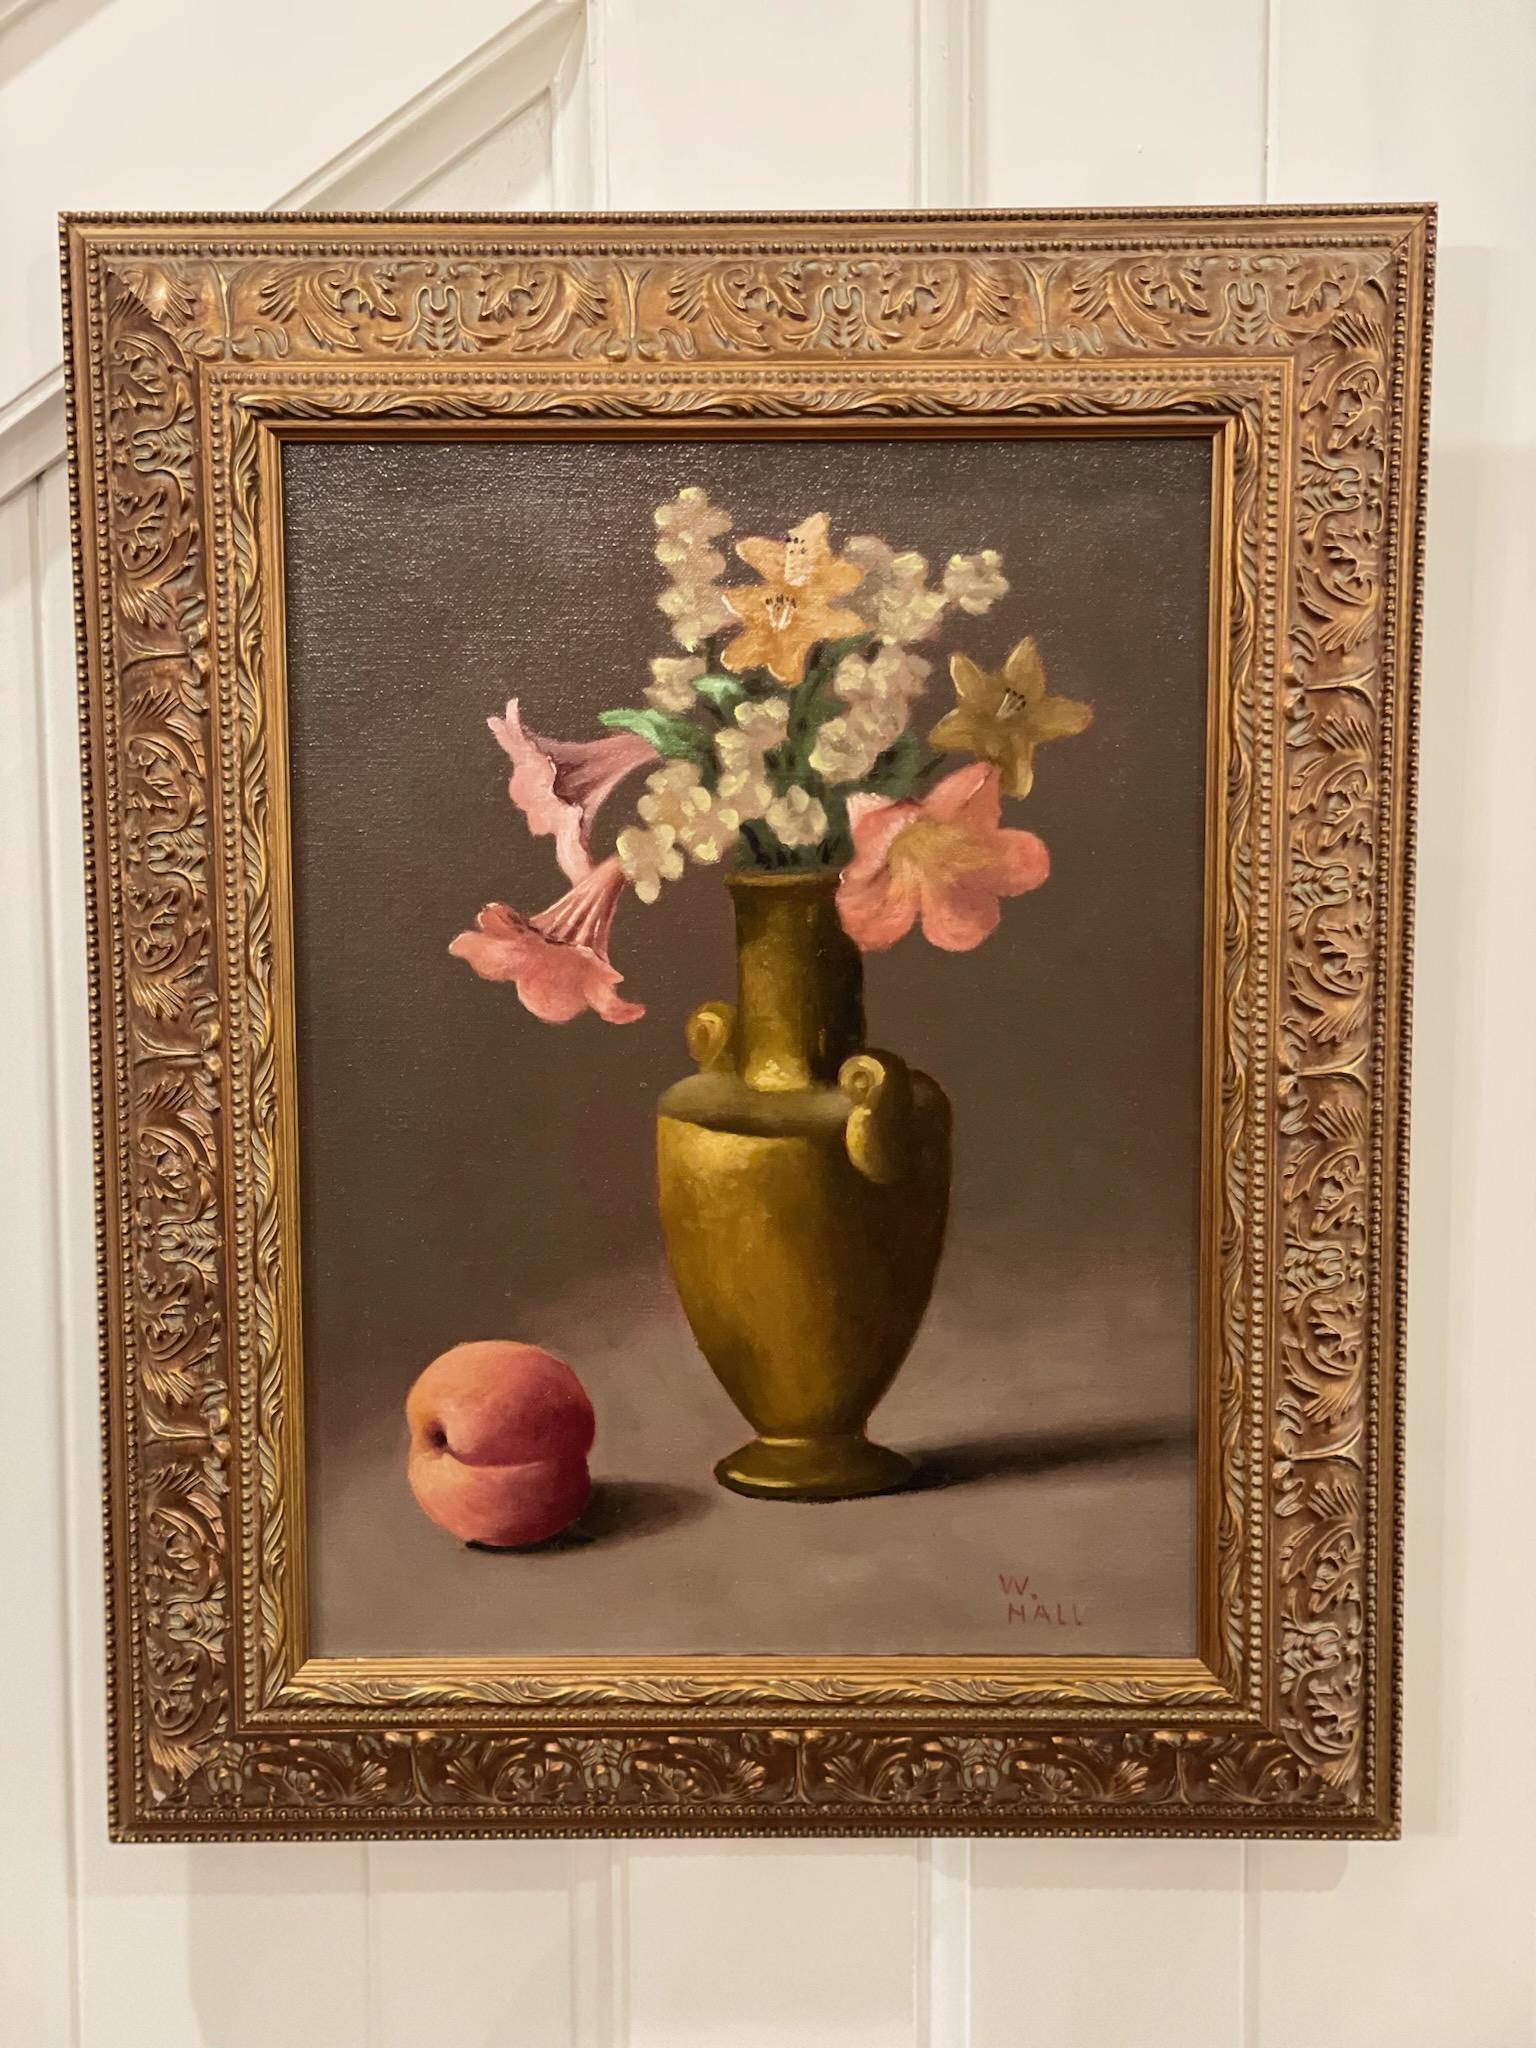 Original Oil Painting Floral Still Life with a Peach Gold Frame Signed by Artist In Good Condition For Sale In Cookeville, TN